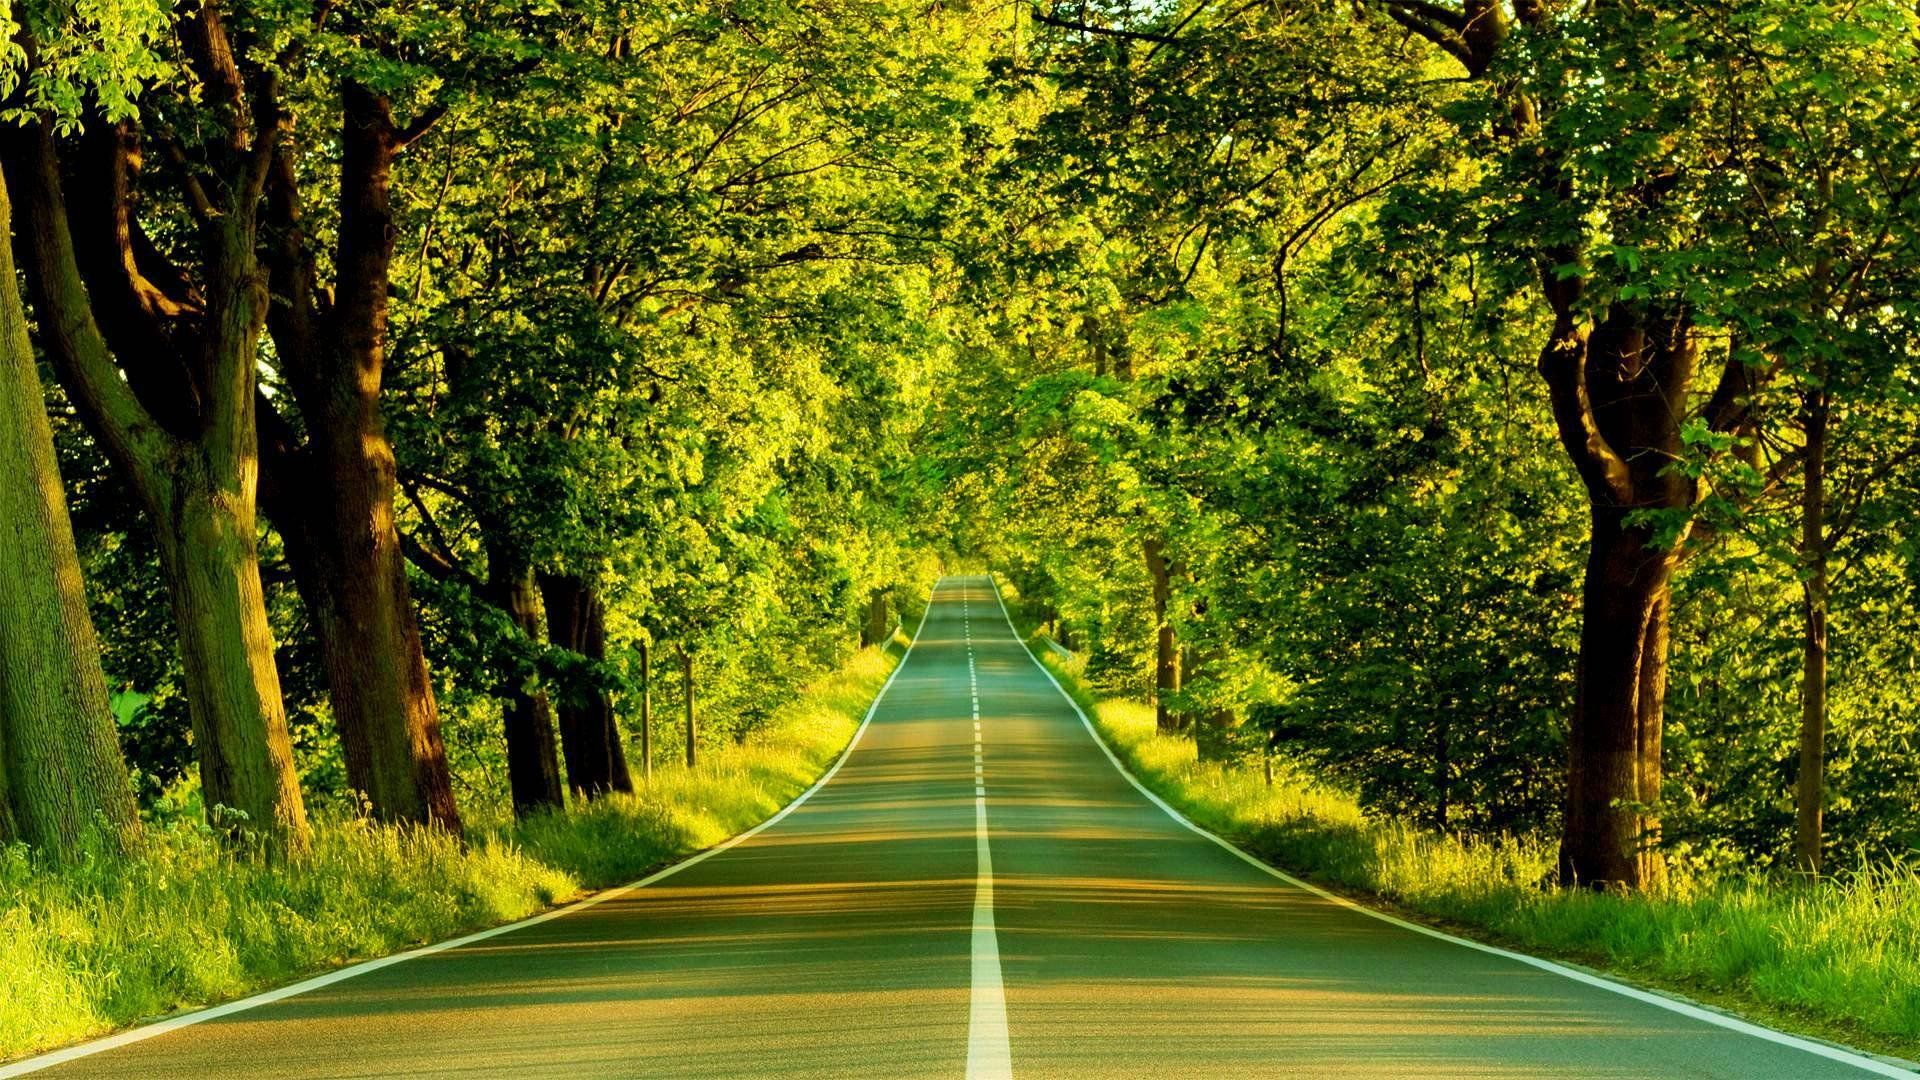 Green Road Wallpaper Free Green Road Background